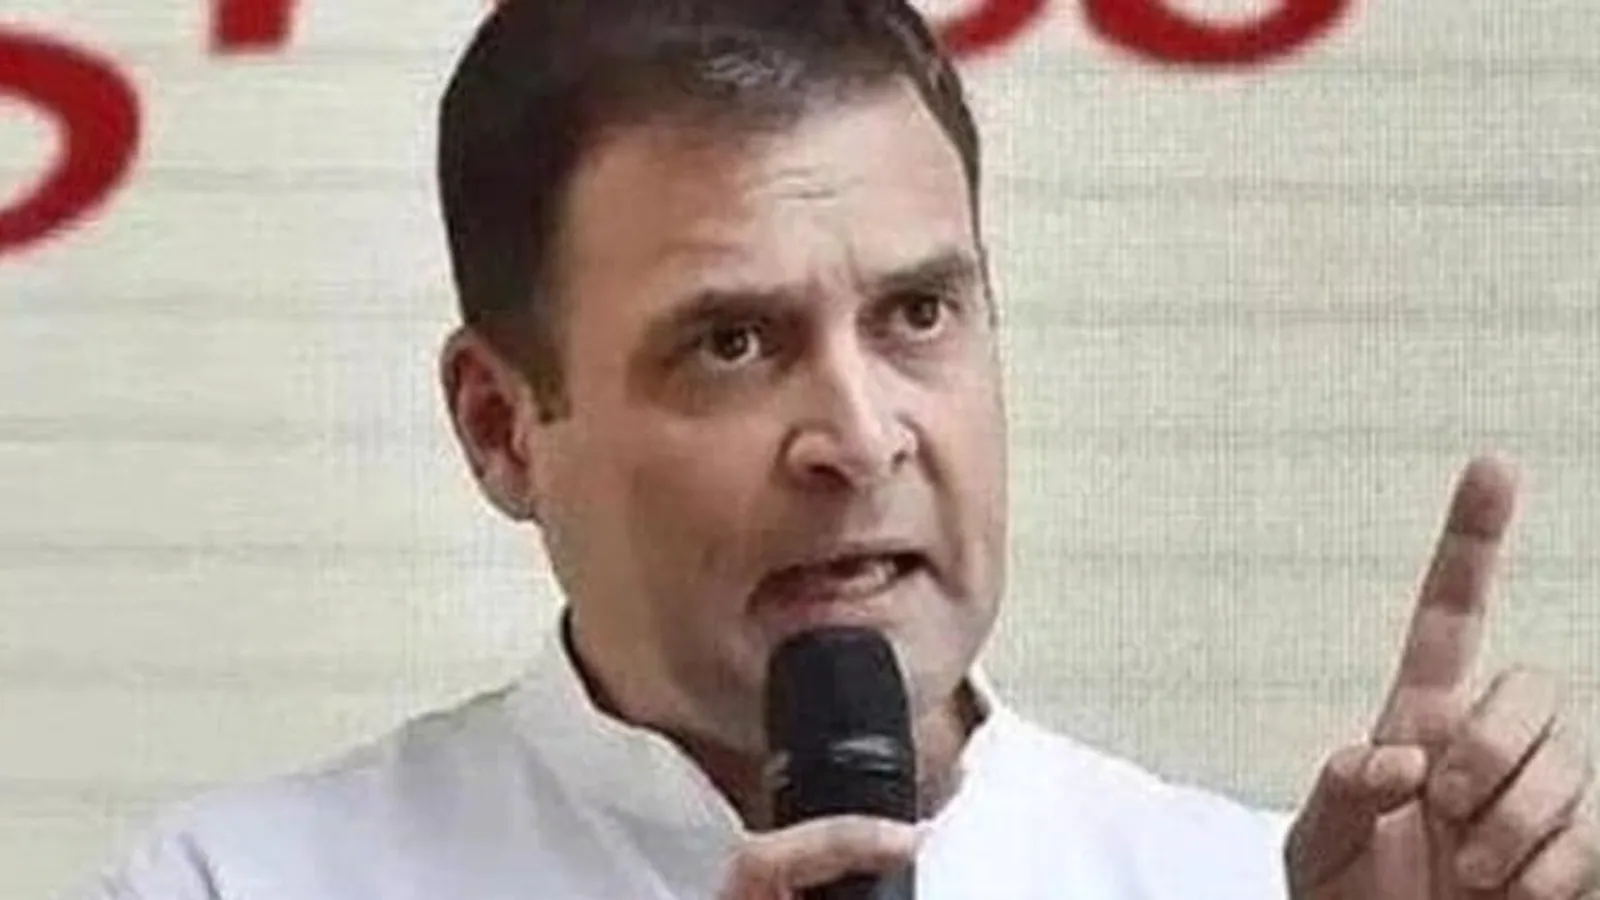 Morning brief: Rahul Gandhi to campaign in poll-bound Manipur today and all the latest news